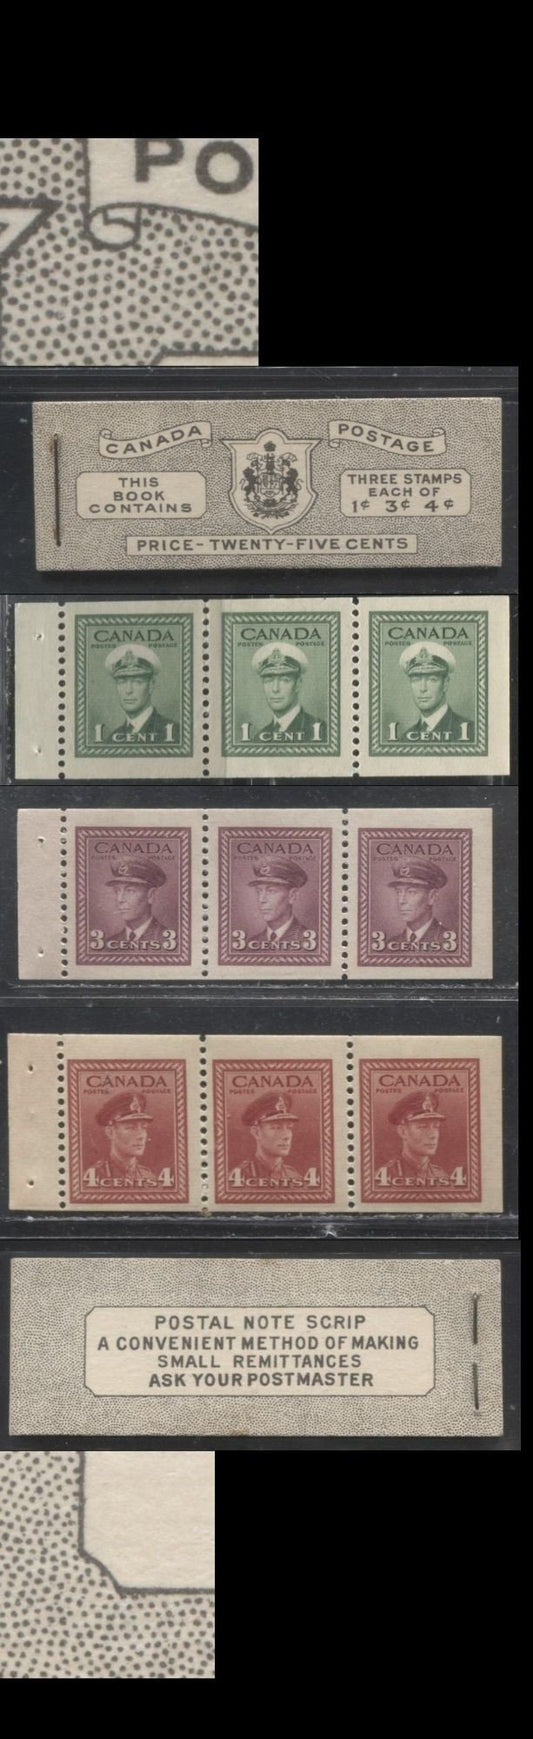 Lot 287 Canada #BK38a 1942-1949 War Issue Complete 25c, English Booklet Containing 1 Pane Each of 3 of 1c Green, 3c Rosy Plum and 4c Carmine Red, Harris Front Cover Type IVa , Back Cover Haii, 7c & 6c Rate Page